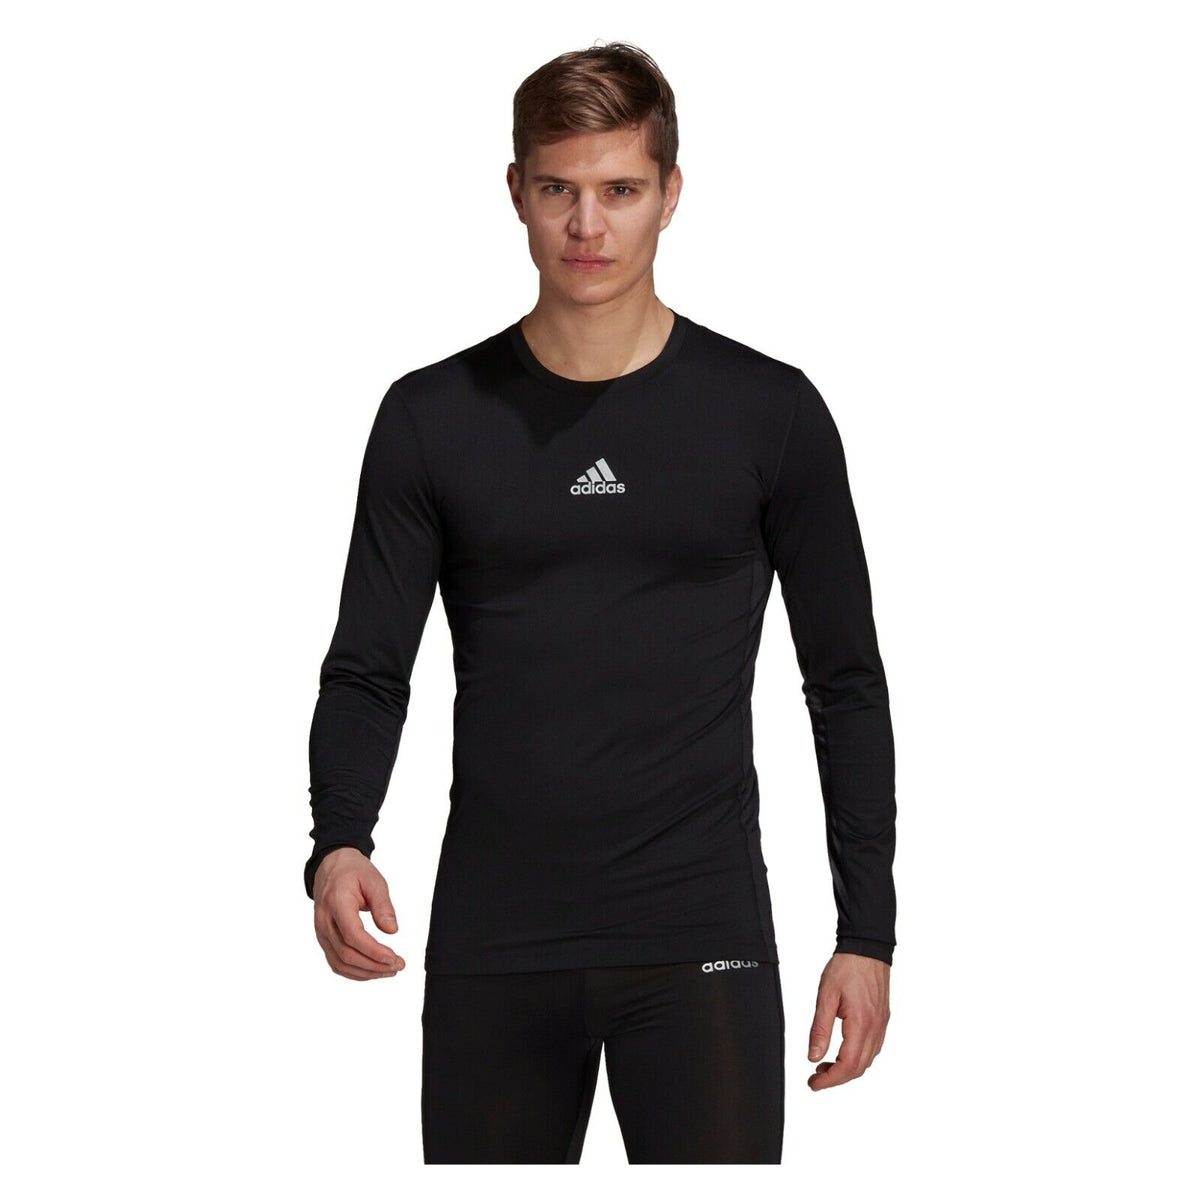 ADIDAS TECHFIT BASE Layer Shirt~Mens Compression Top~ClimaLite~All  Sizes~RRP £22 £9.99 - PicClick UK